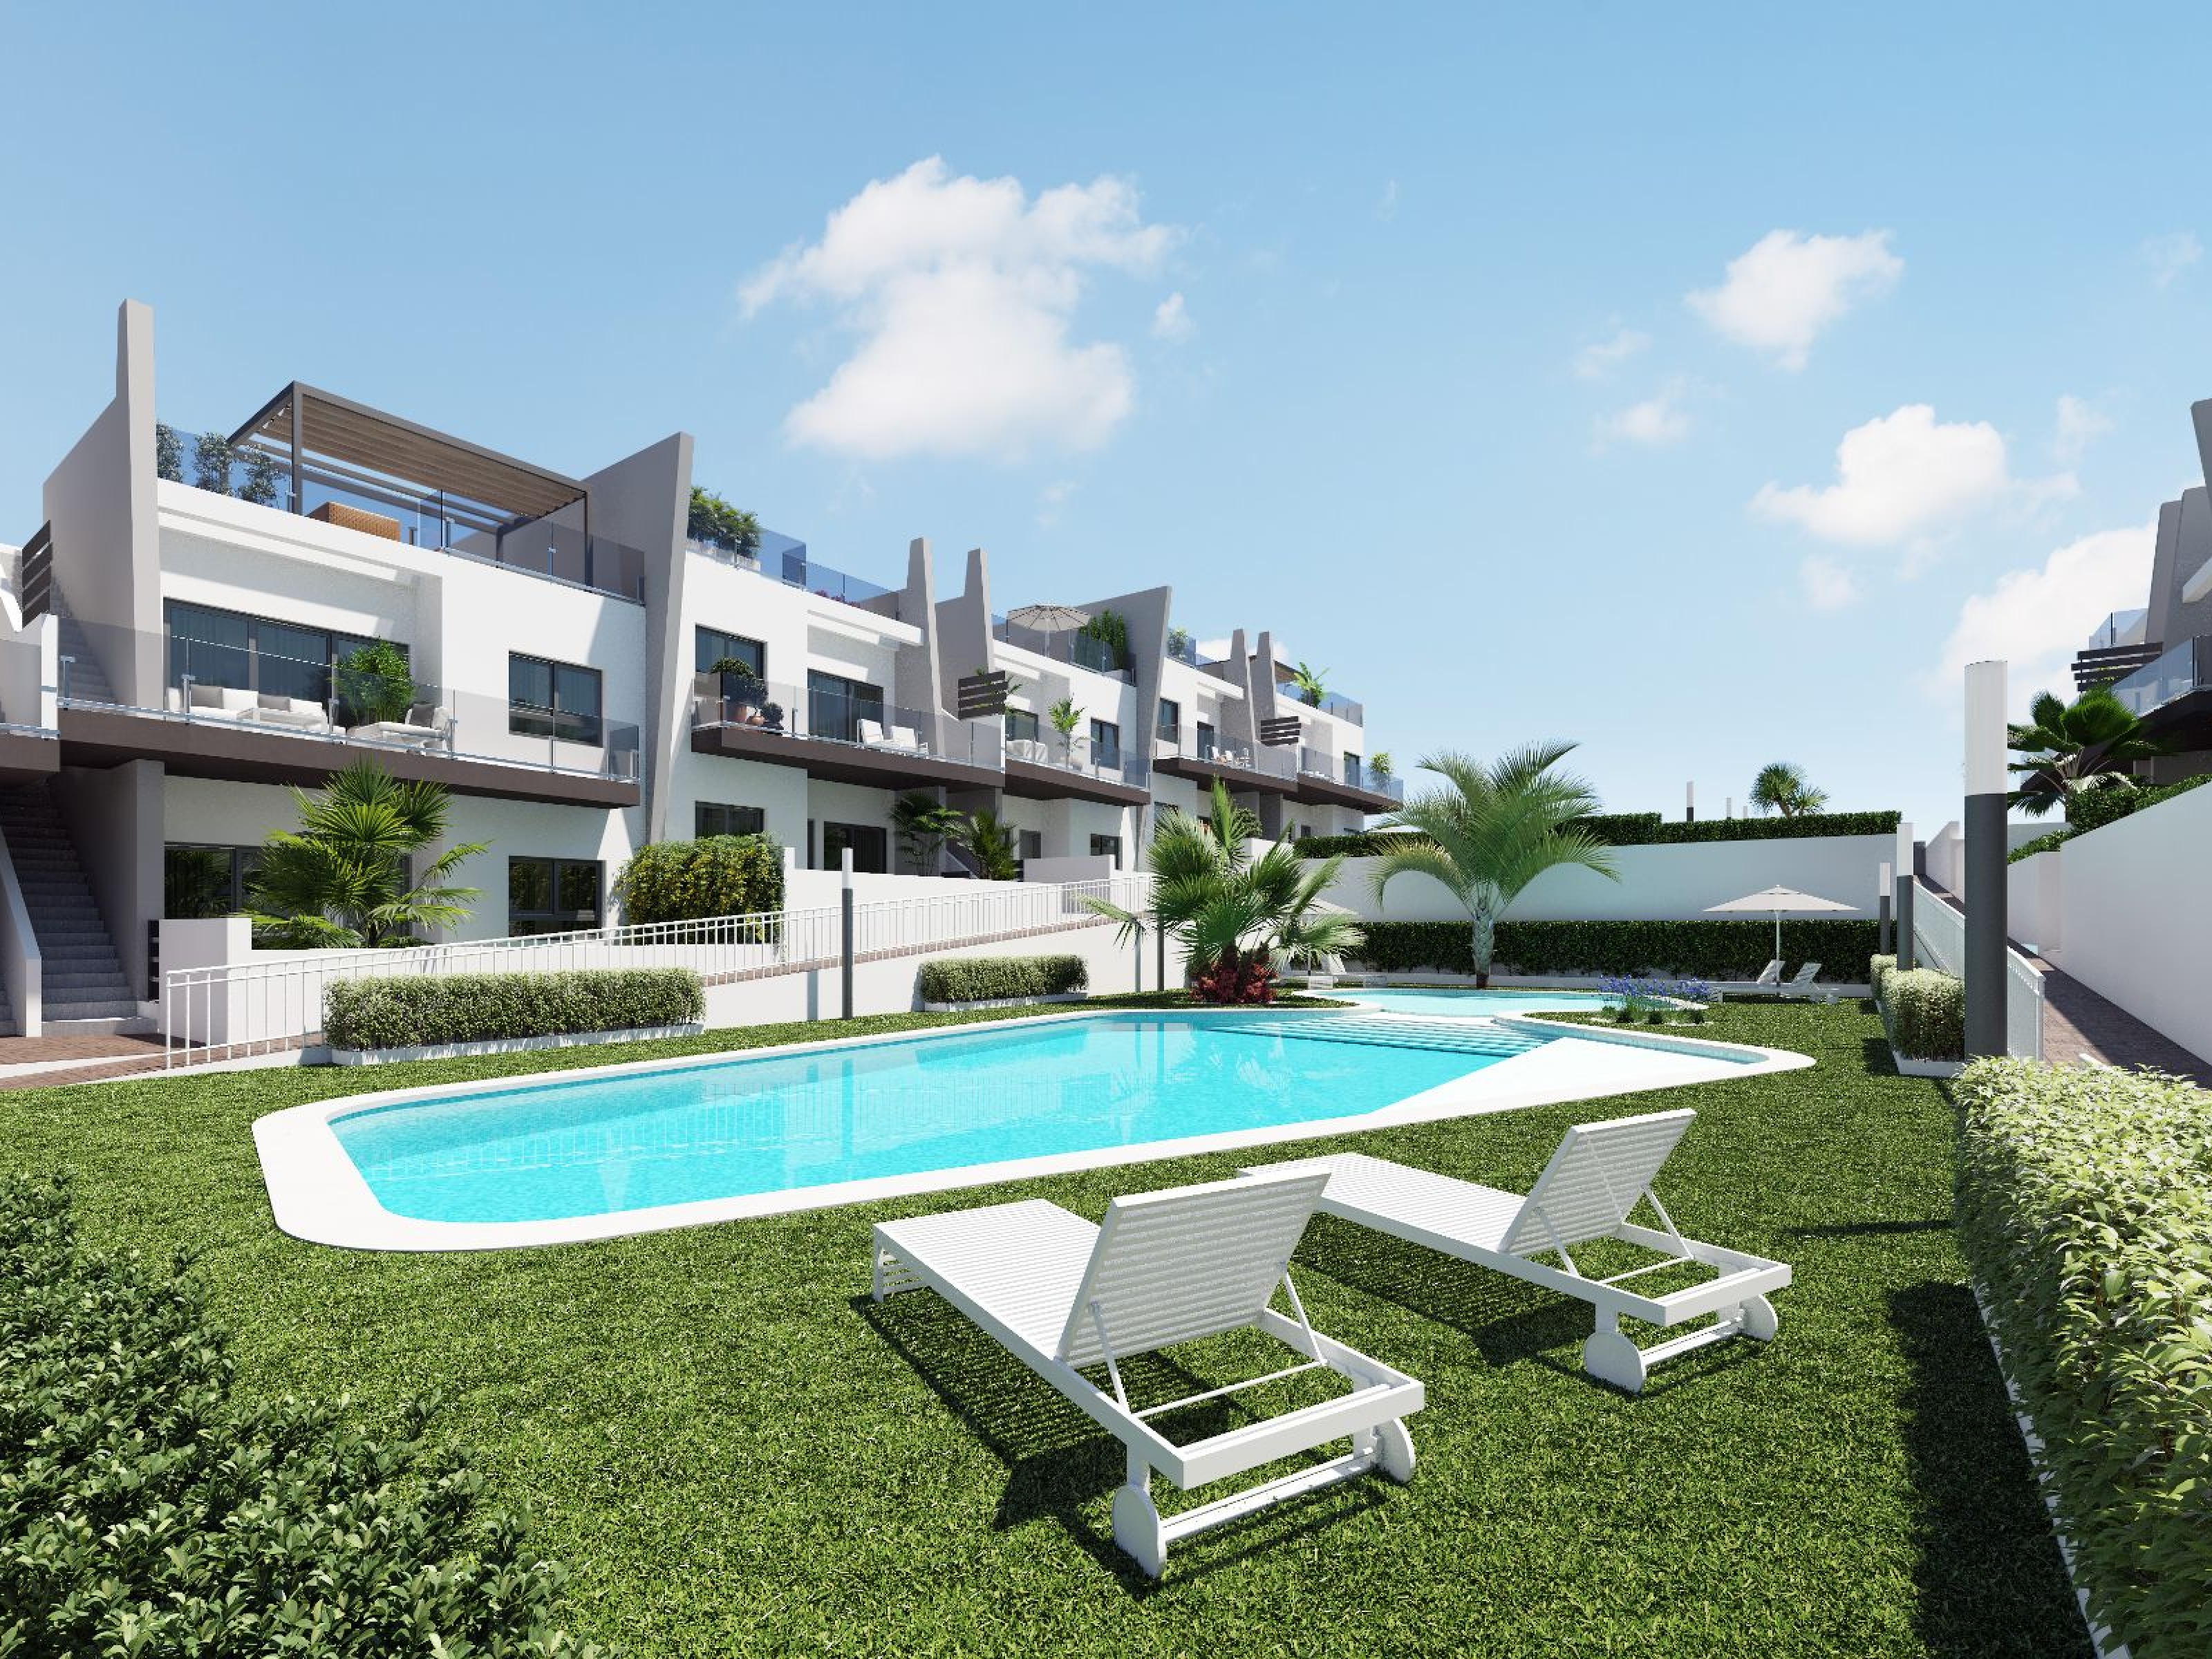 New Development of top or ground floor apartments in a traditional Spanish town